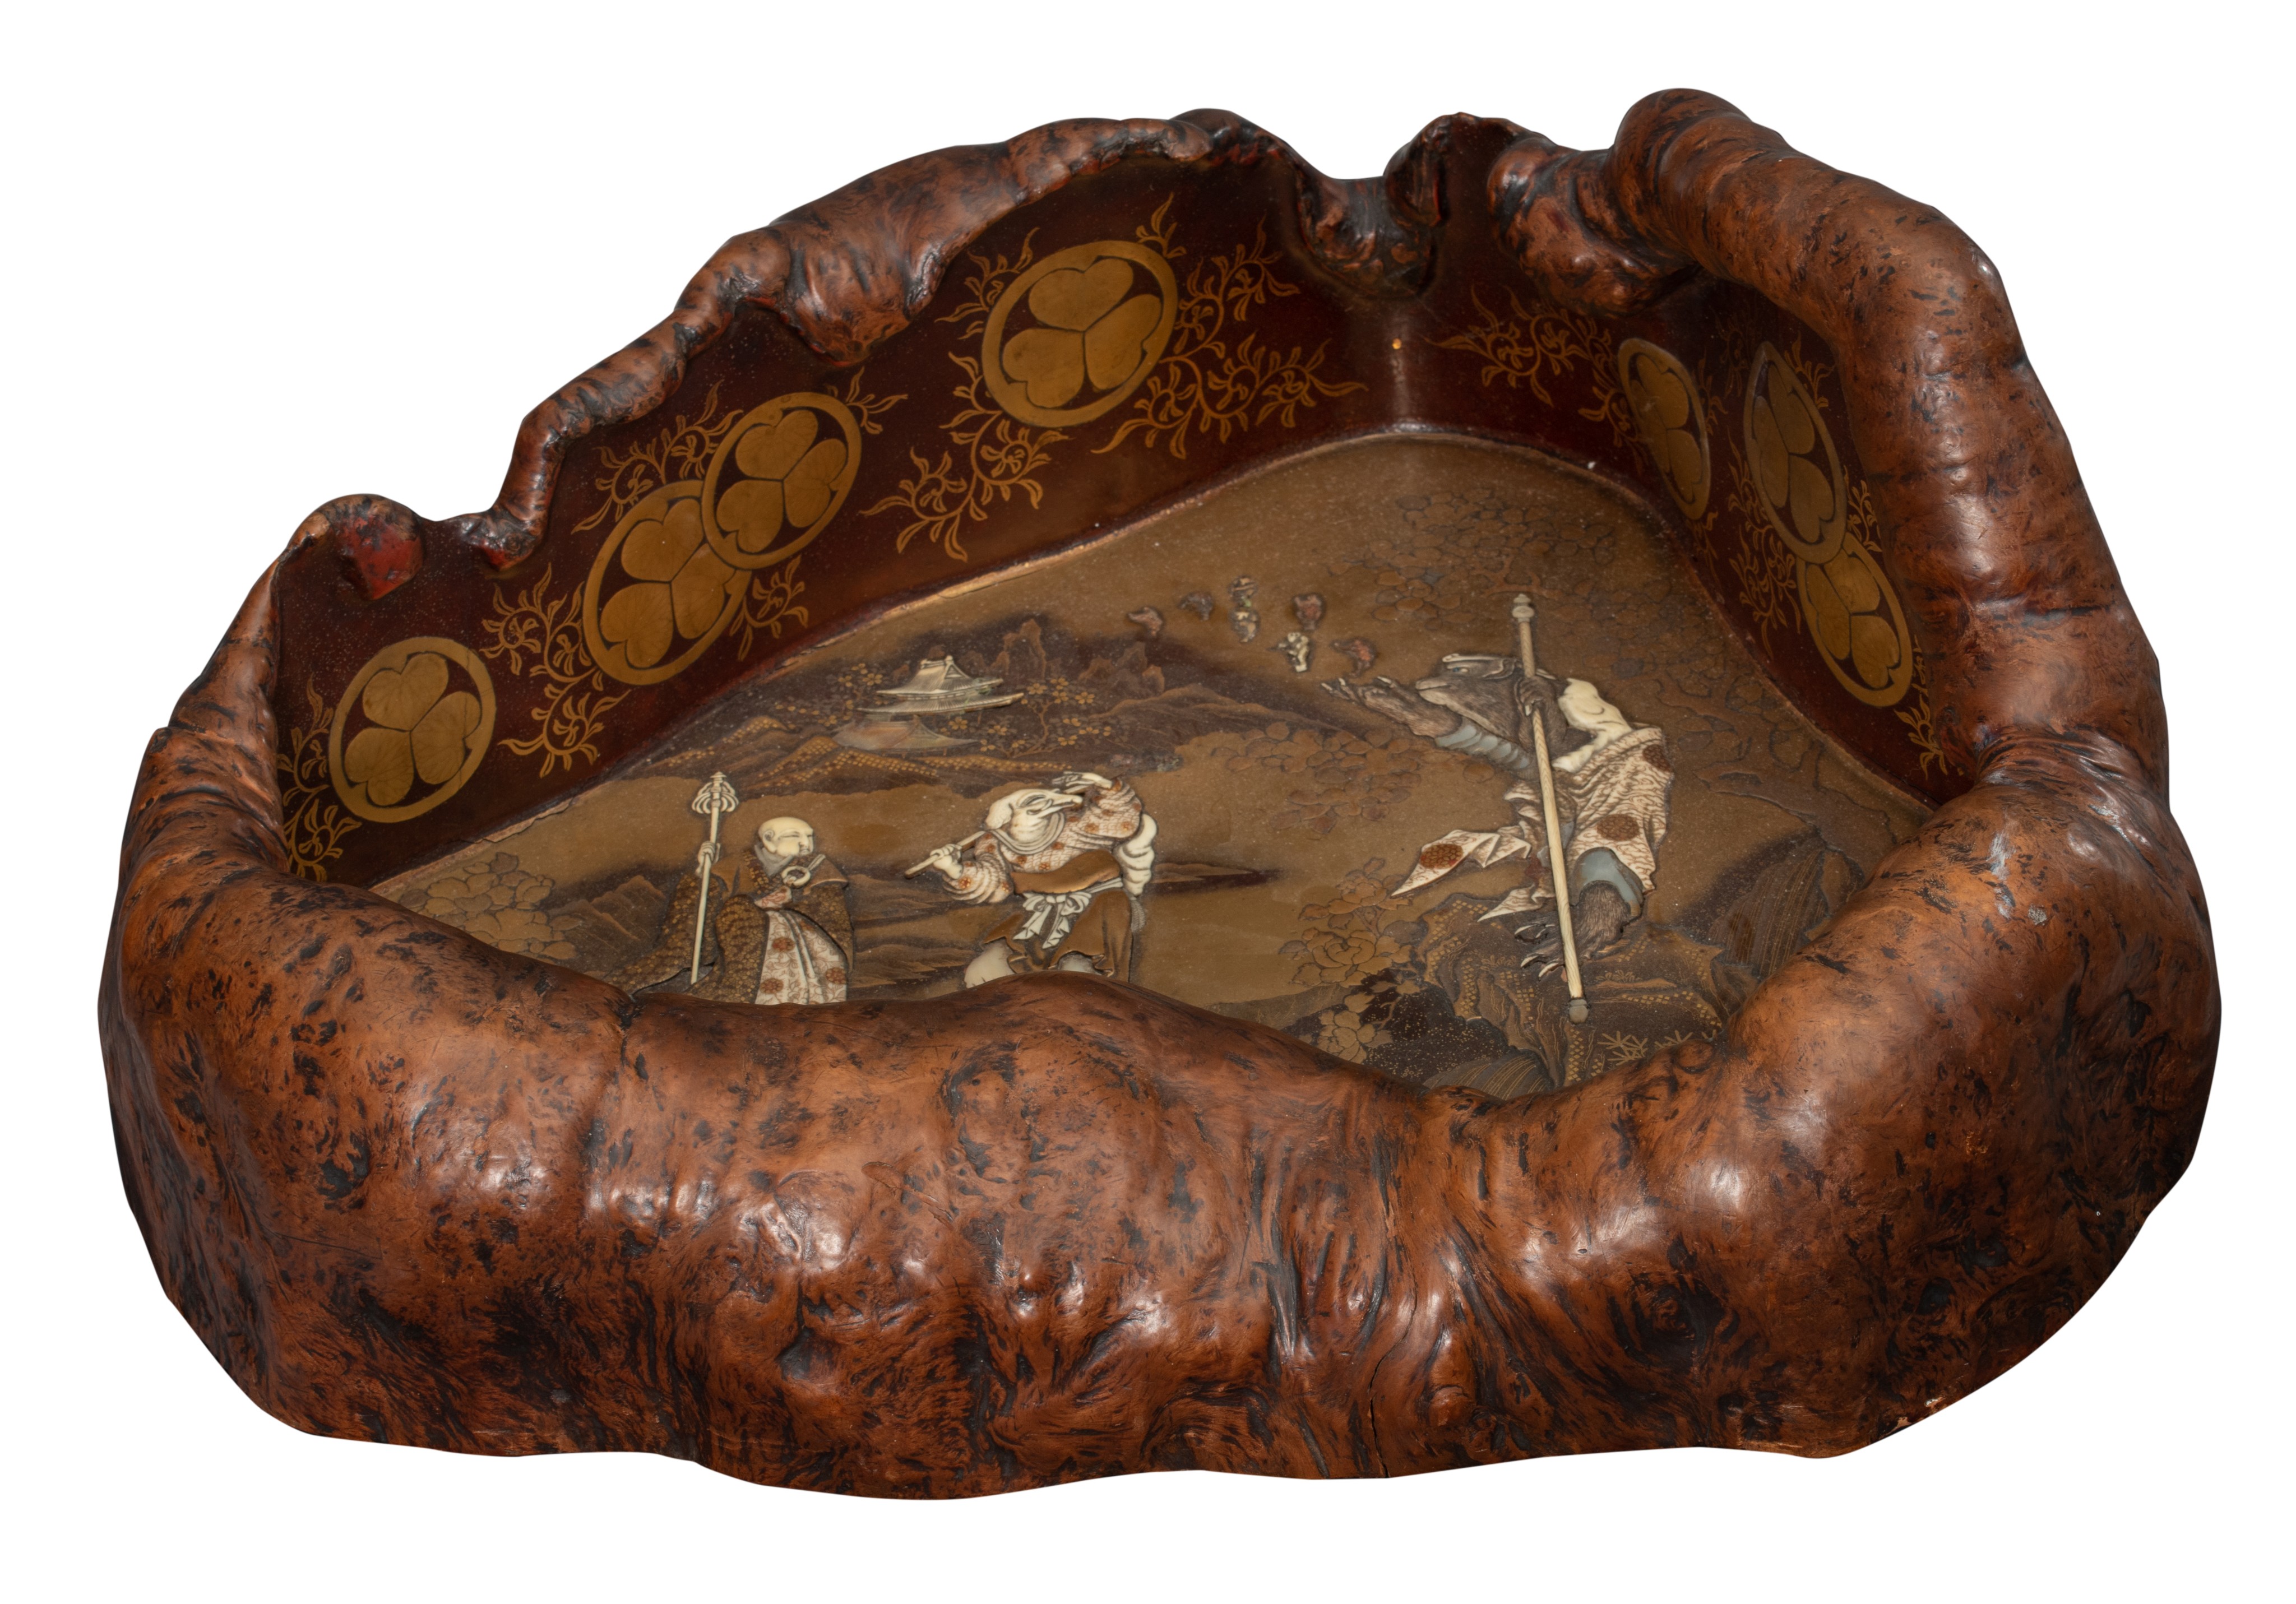 A fine Japanese 'Journey to the West' Shibayama inlay and gold lacquered decorative burlwood bowl, m